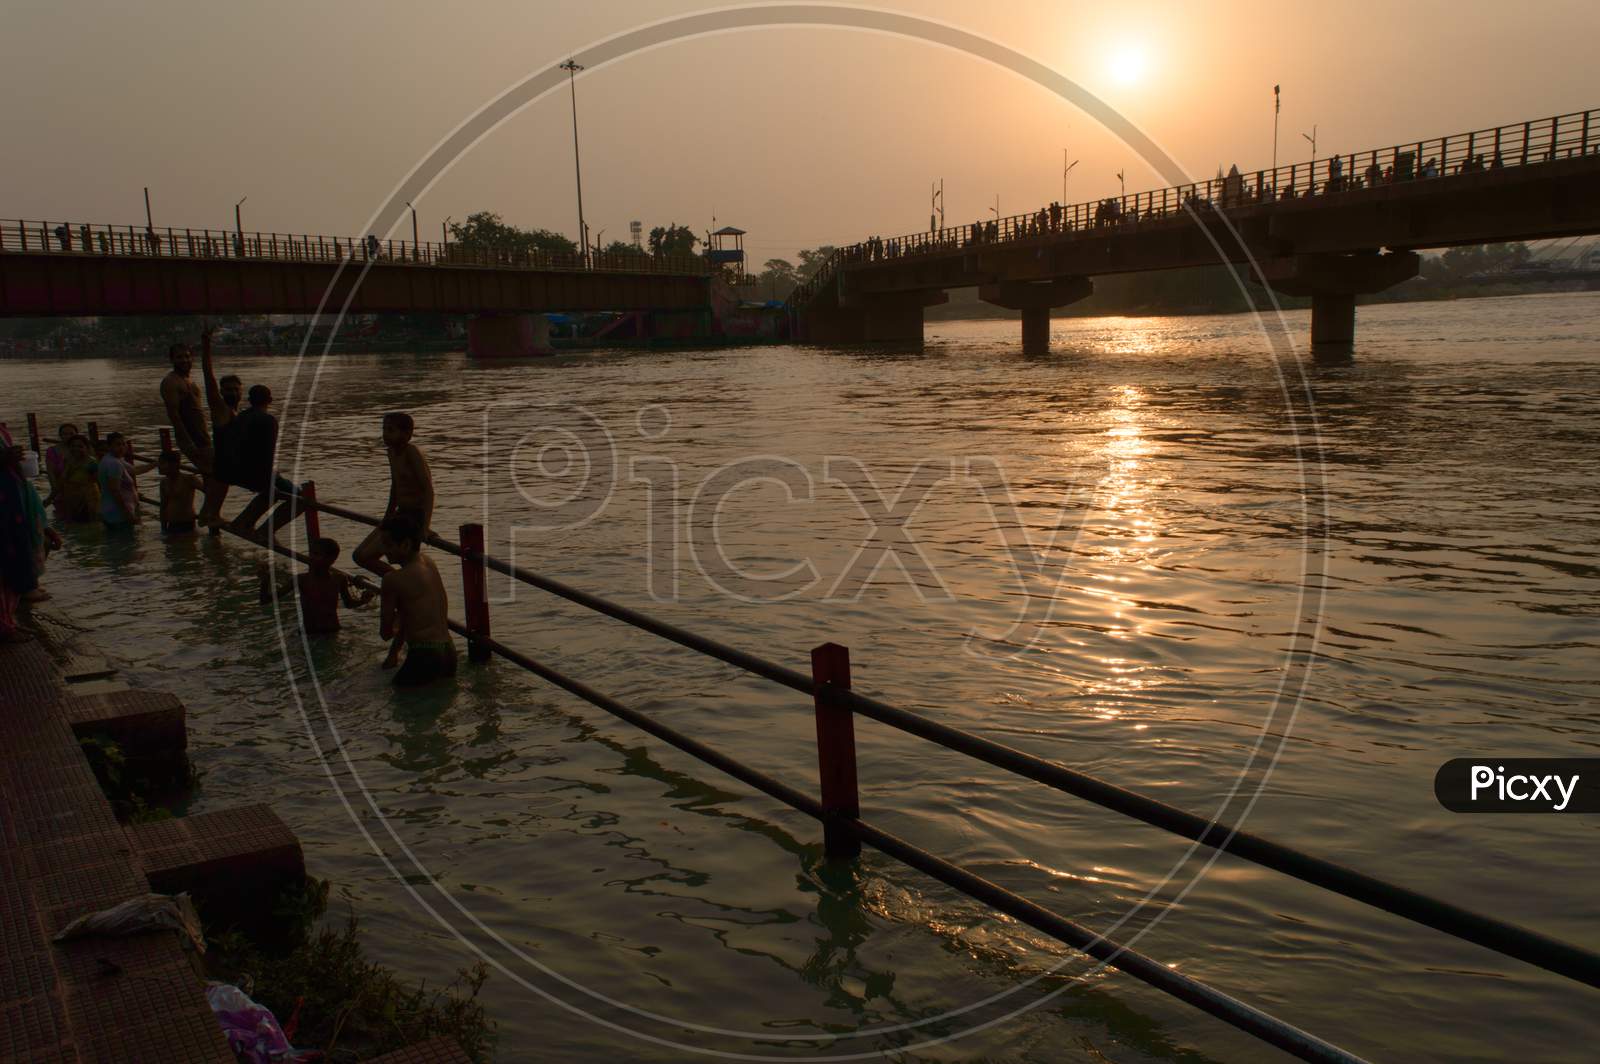 Many Boys Going To Jump Into Ganga River For Relief Of Heat In Summer At Sunrise At Haridwar Bridge Temple Sky.